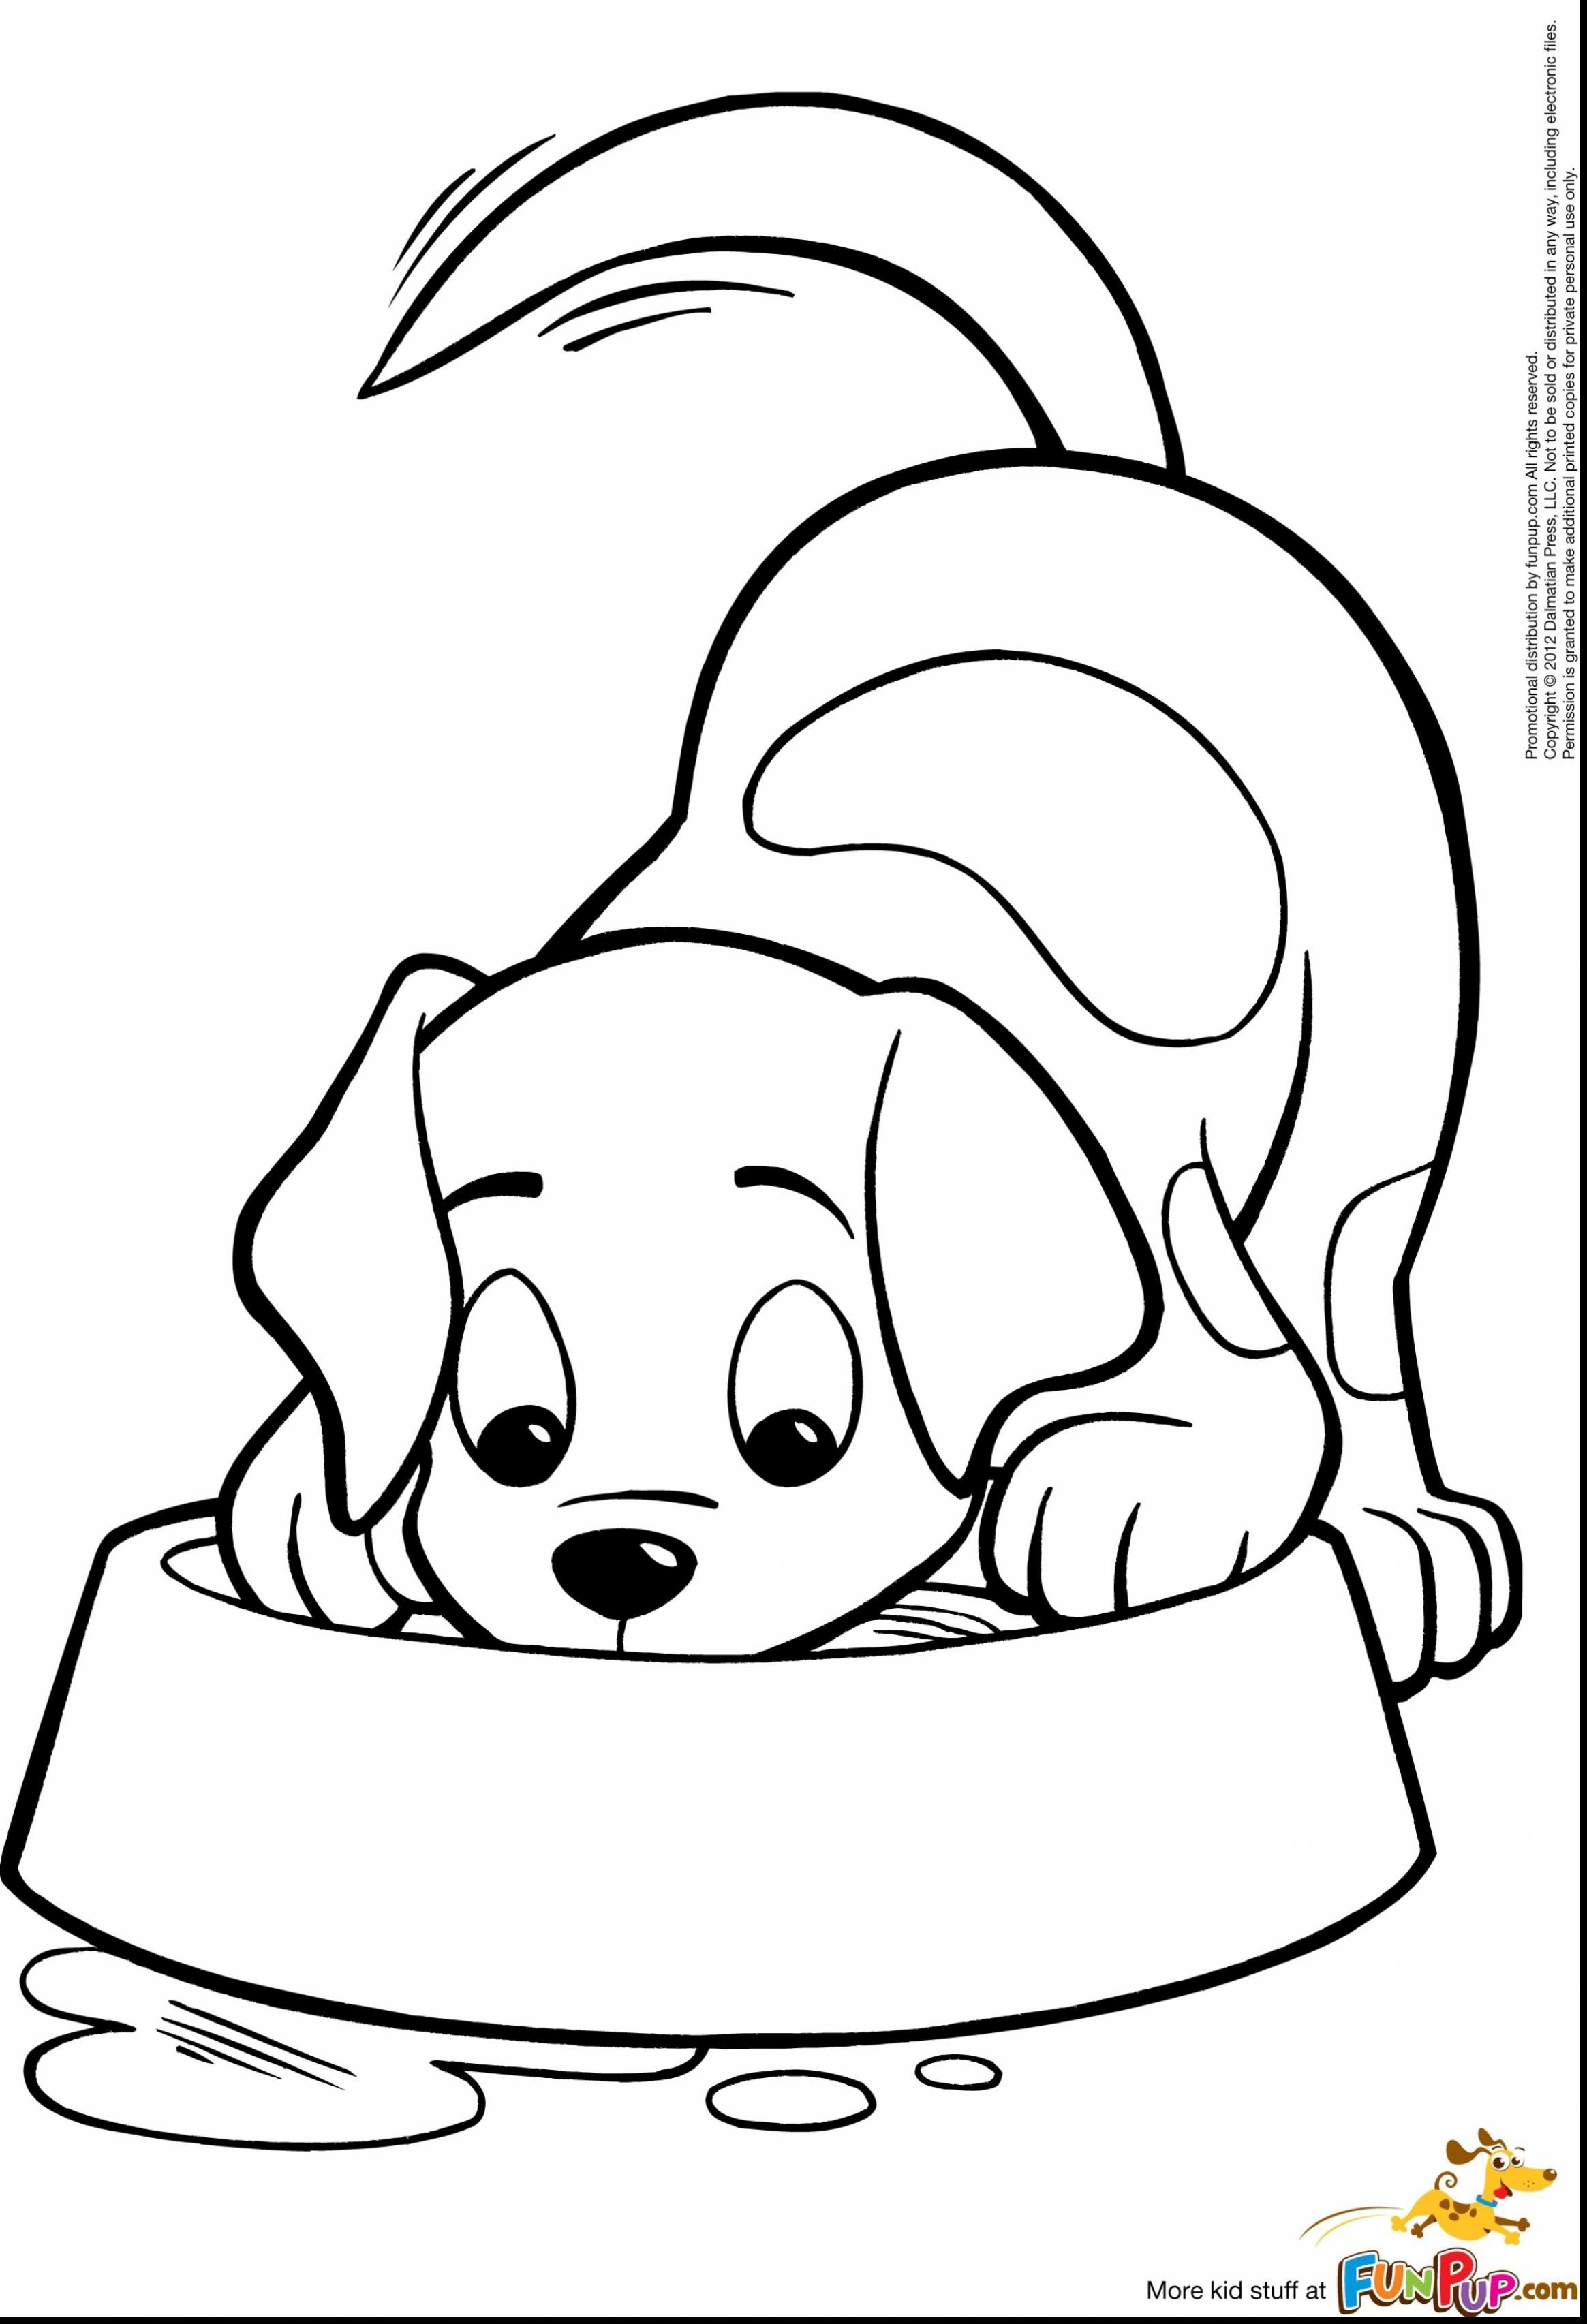 Cute Puppies Coloring Pages to Print Wallpaper